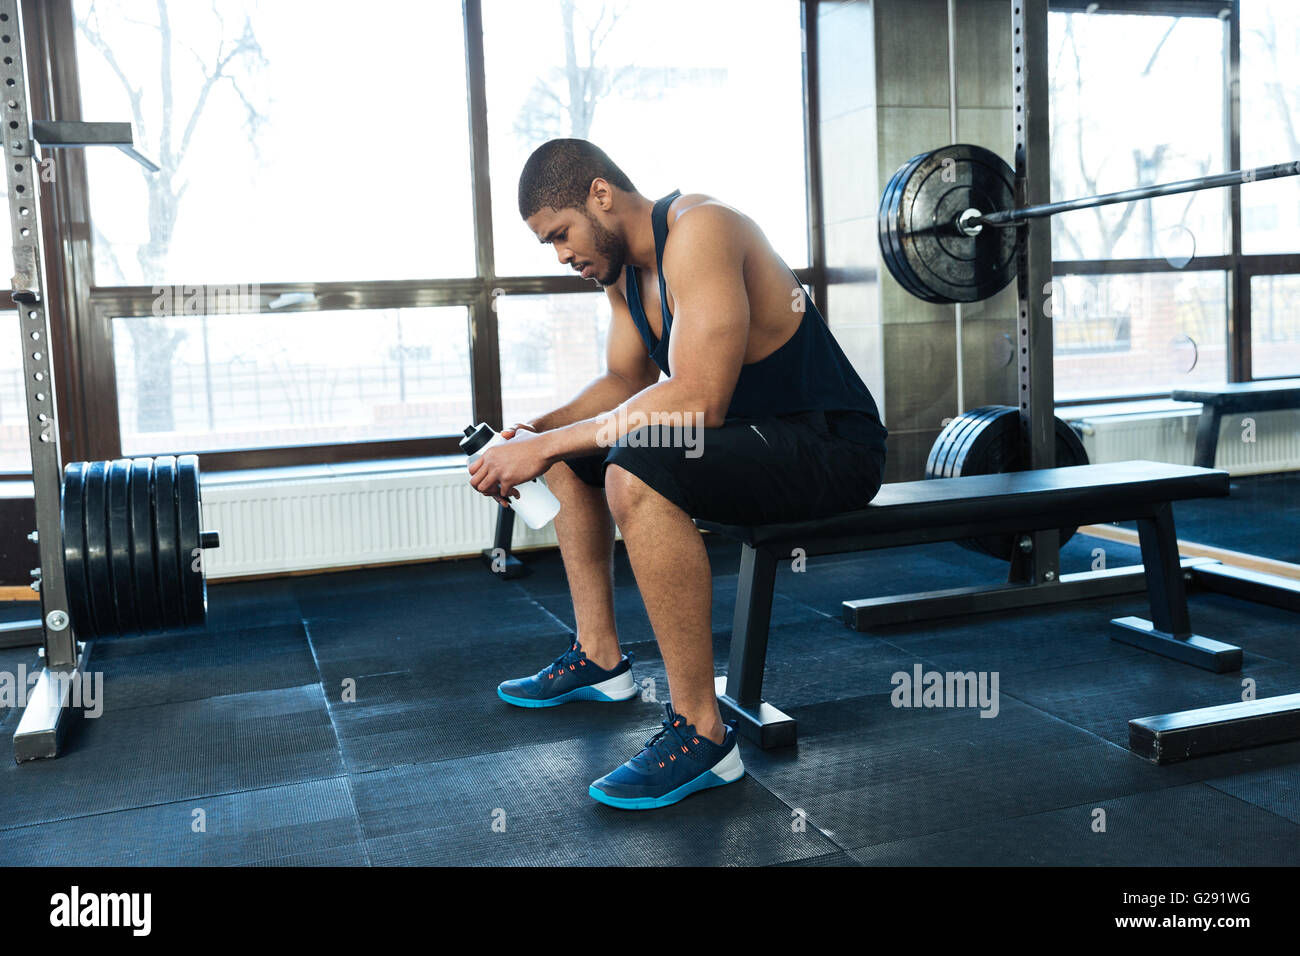 Afro american fitness man resting on the bench in the gym Stock Photo